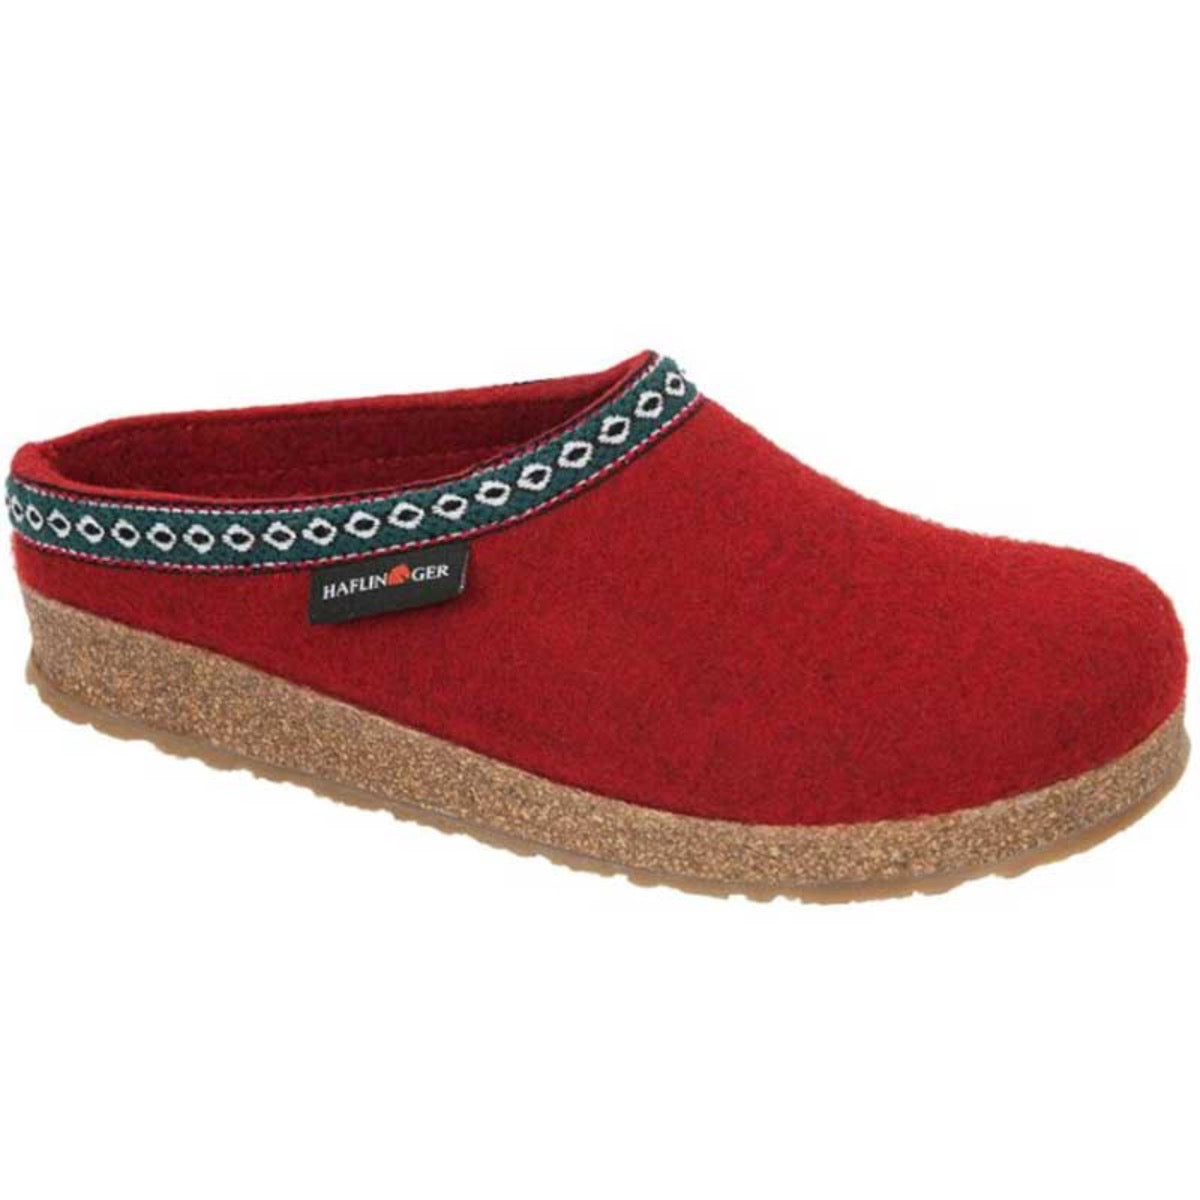 Haflinger, Grizzly Clog, Women, Chili